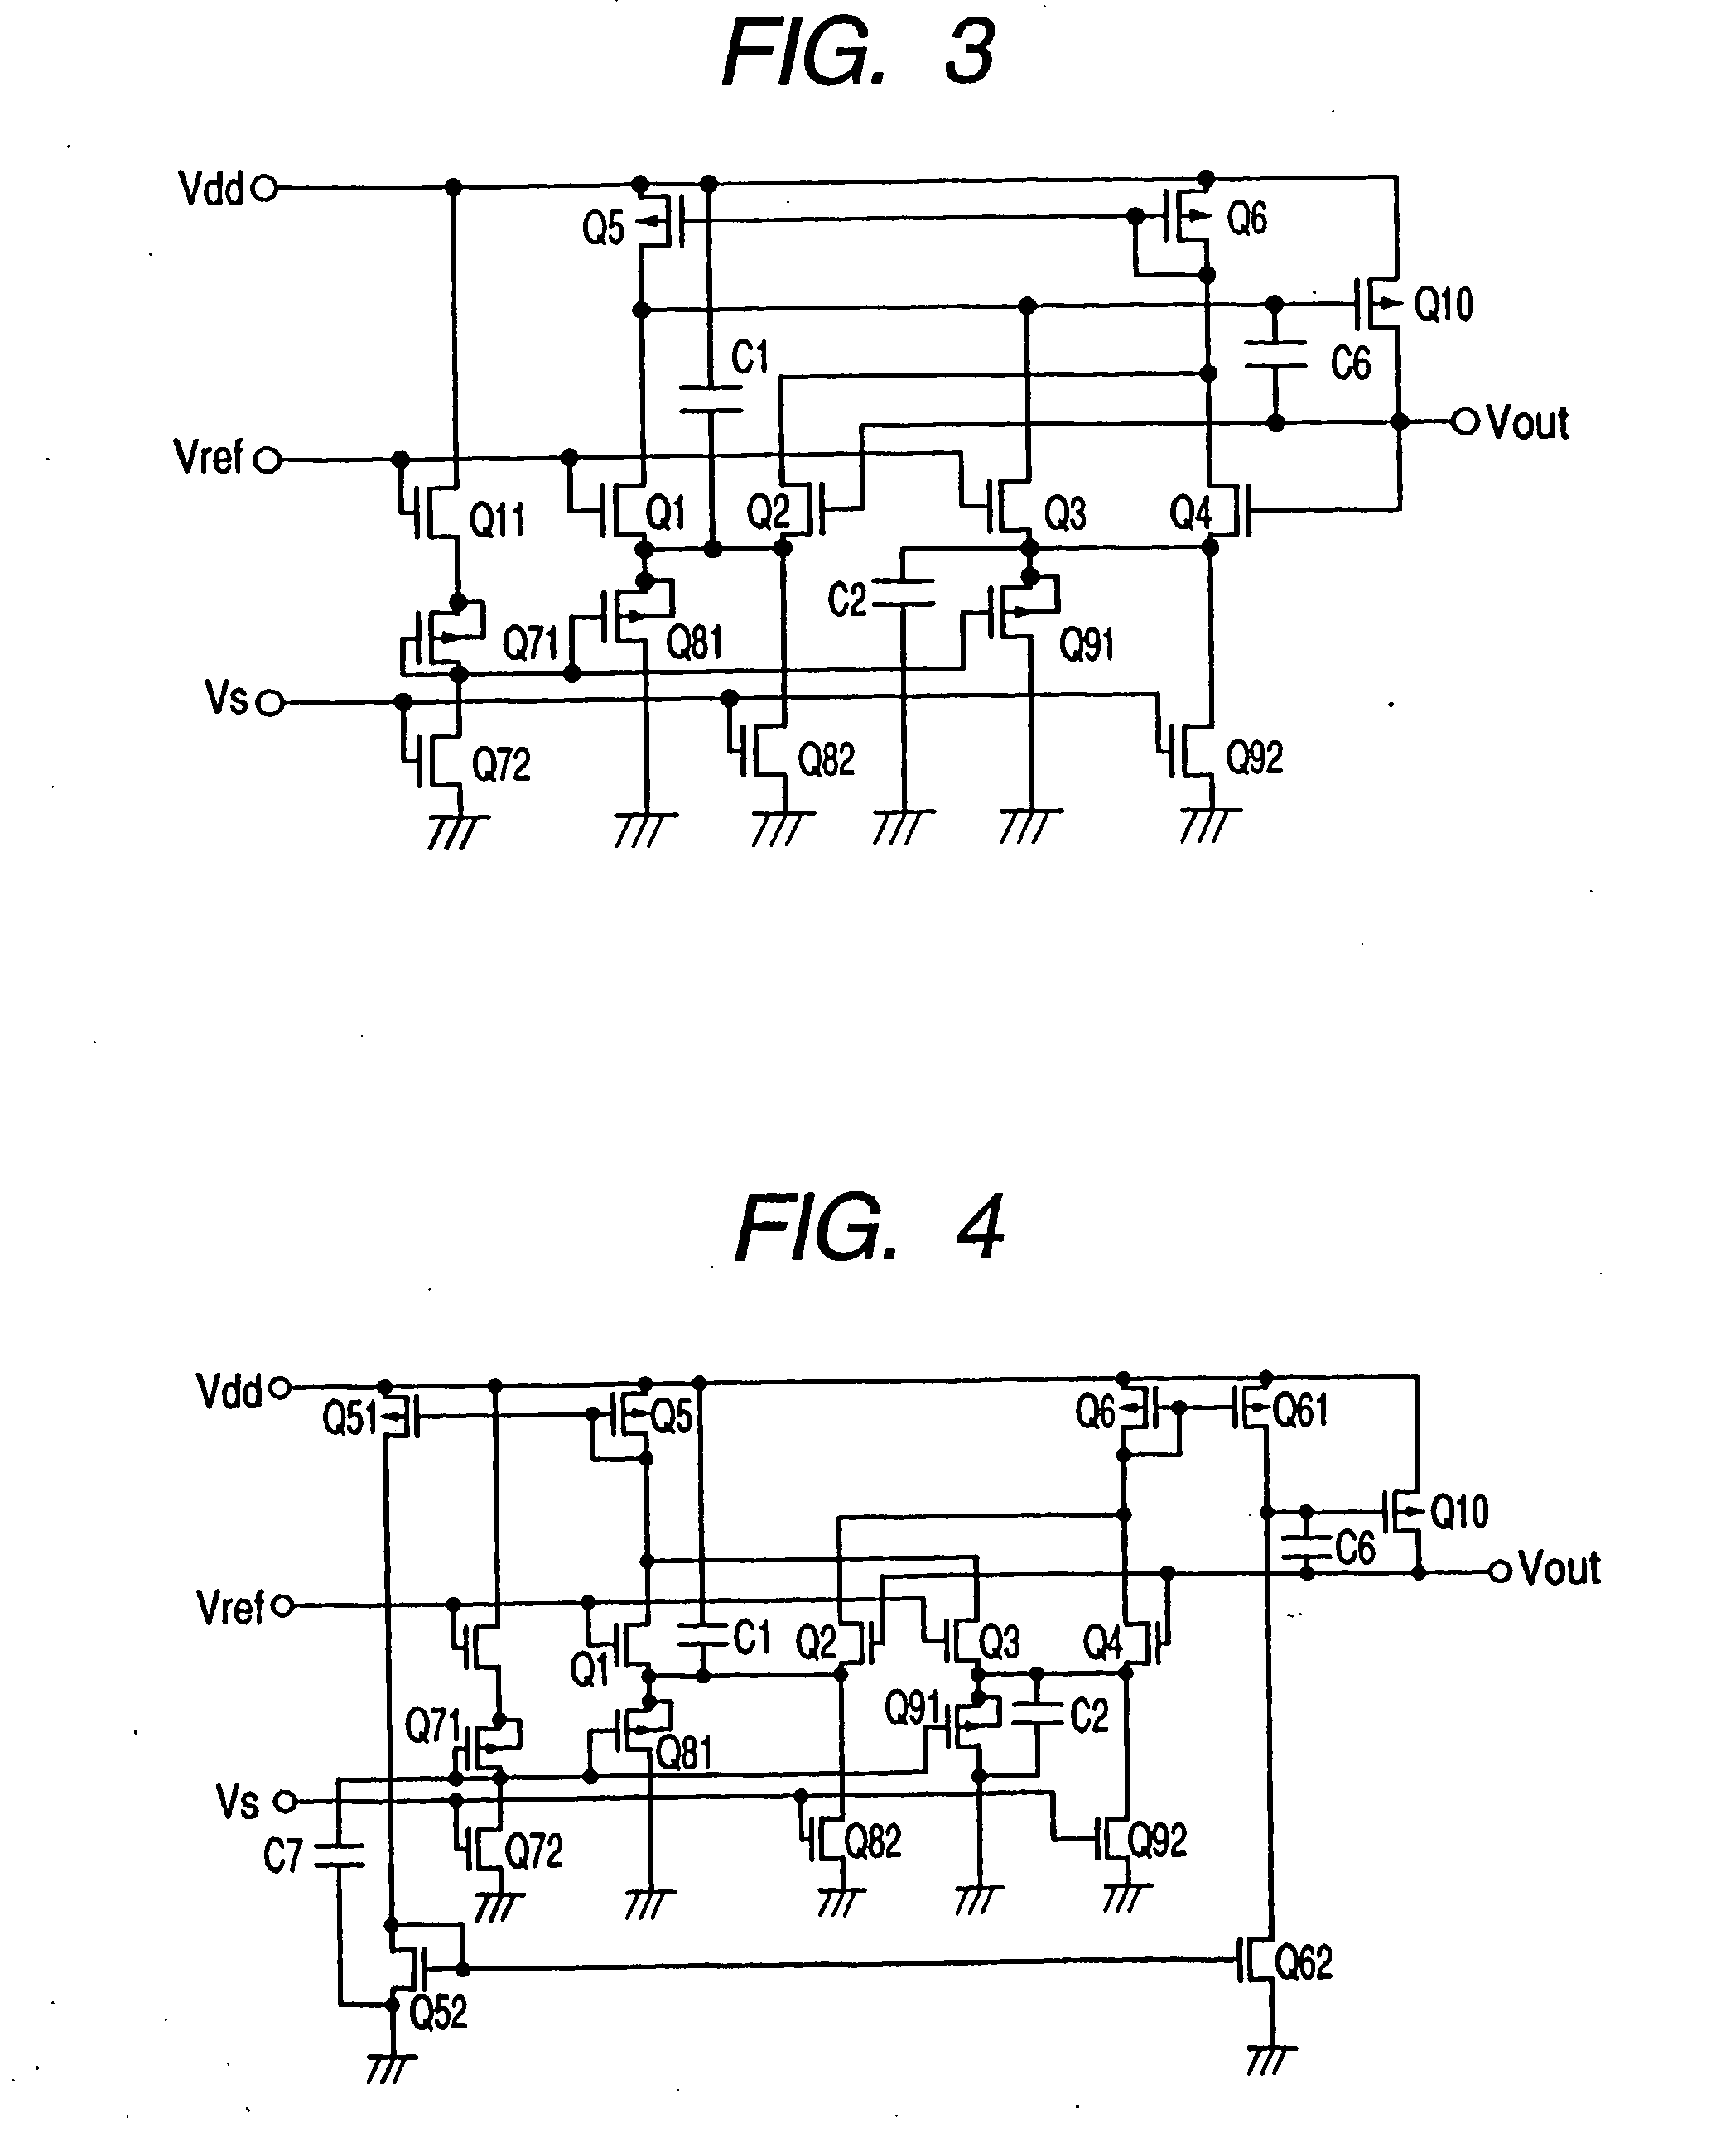 Step-down circuit with stabilized voltage